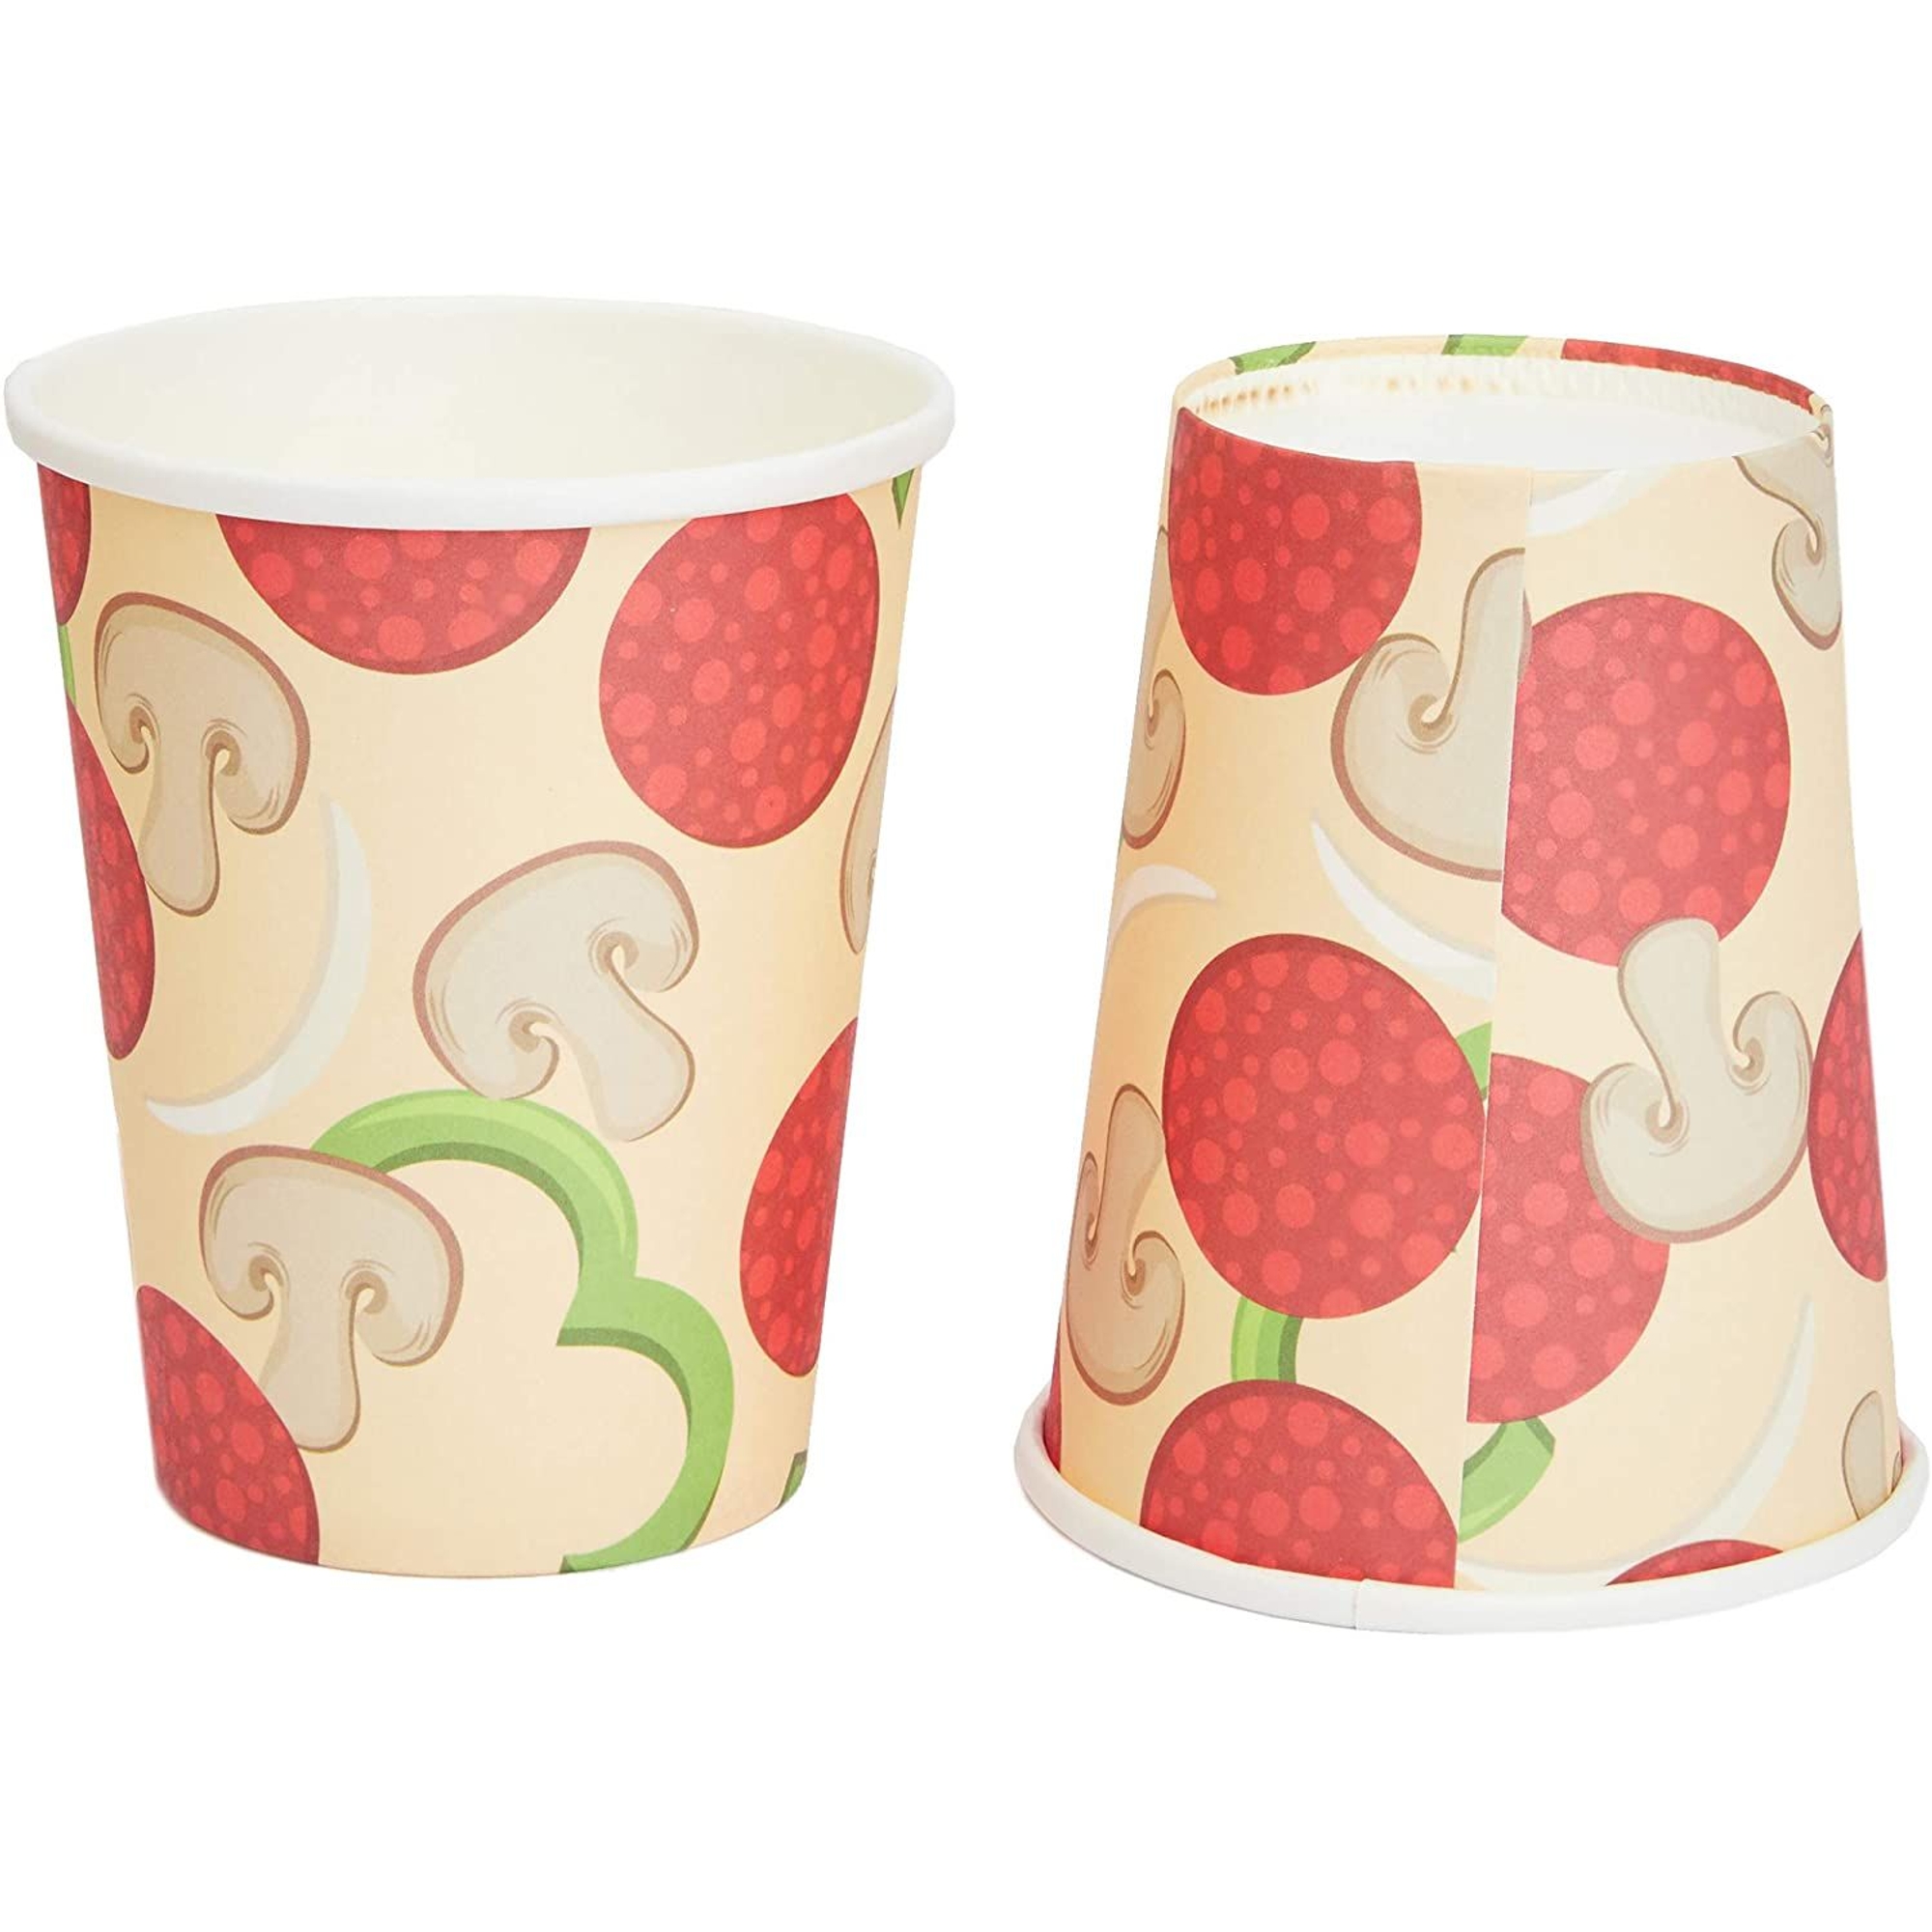 Pizza Party Supplies Kit, Includes Plates, Napkins and Cups (Serves 24 Guests) - image 4 of 8